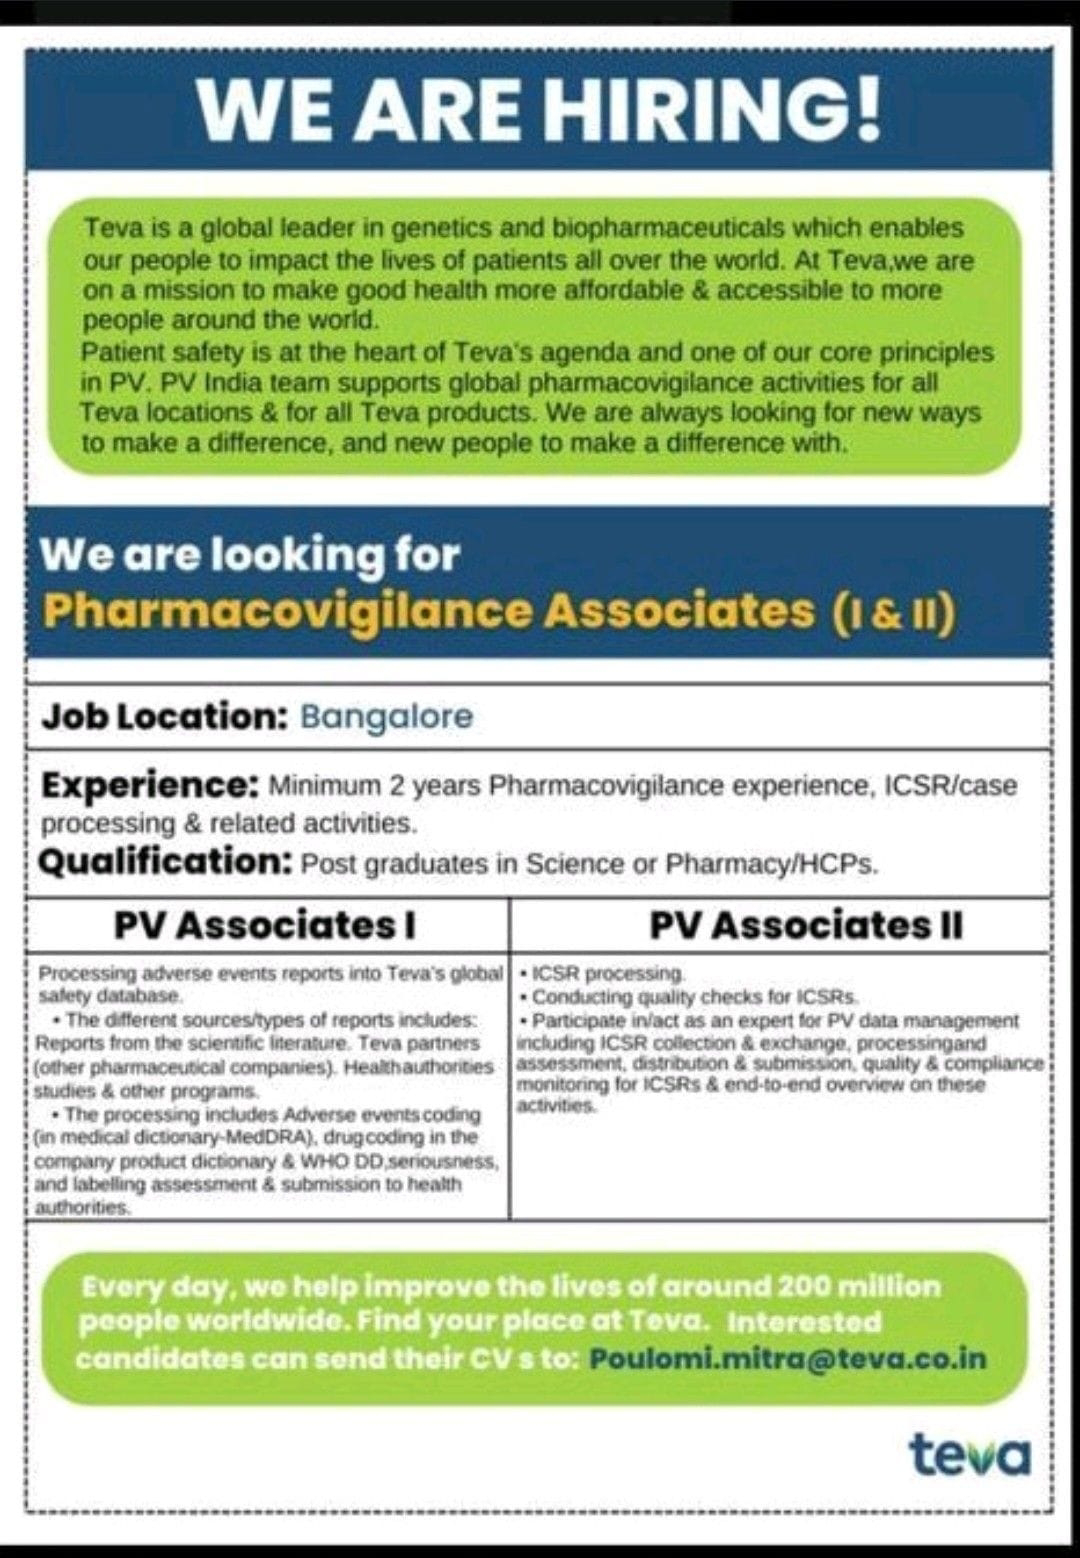 Job Availables, Teva's Limited Job Vacancy For Post graduates in Science or Pharmacy/ HCPS.